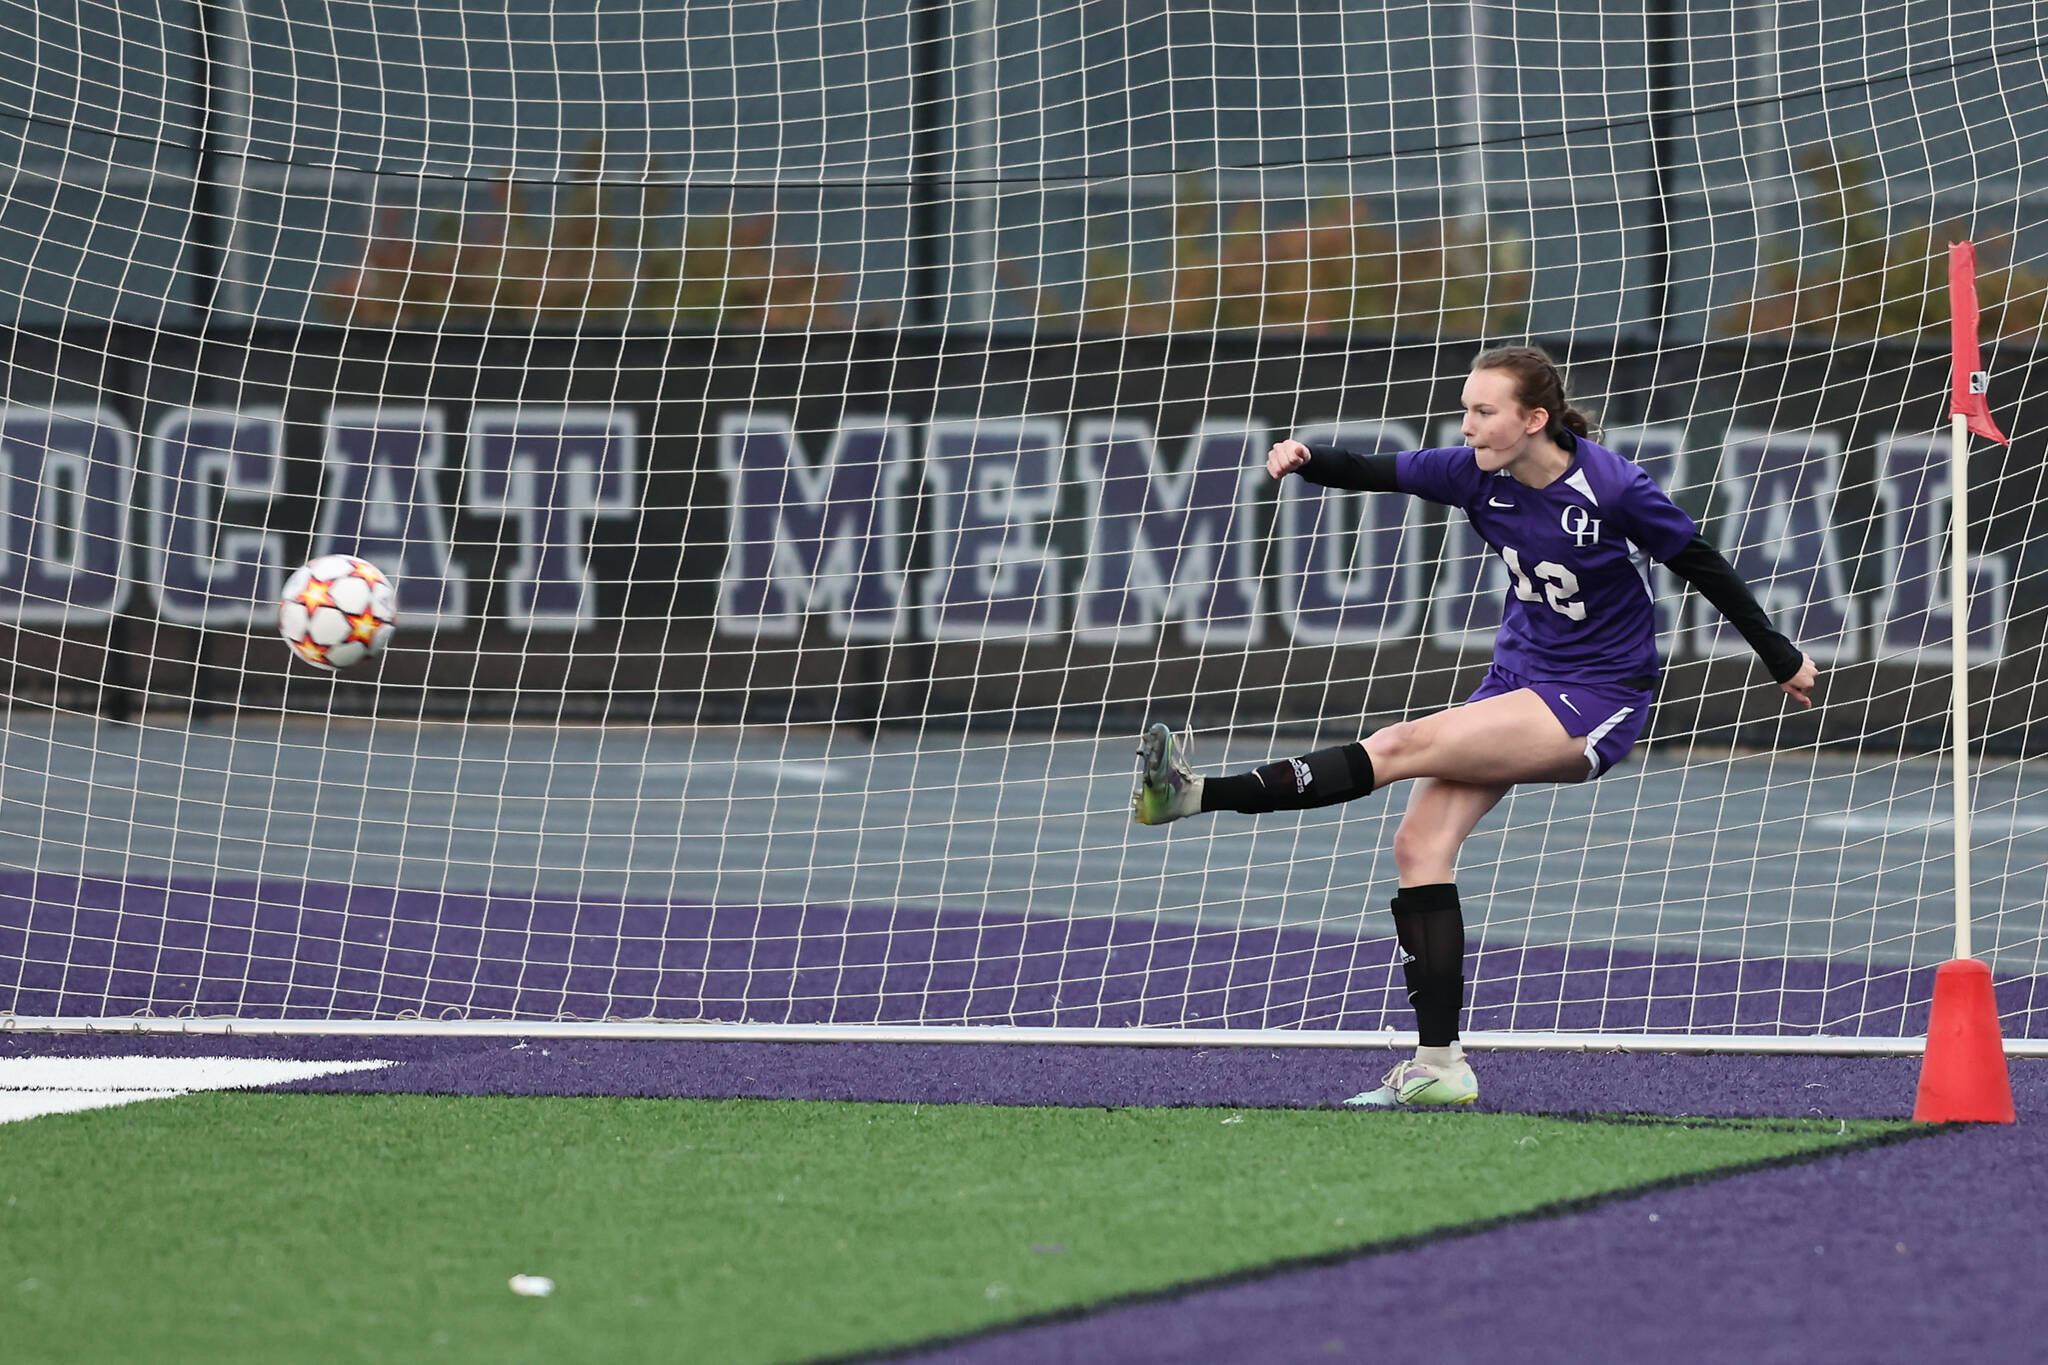 Photo by John Fisken
Carly Vangiesen scored on a corner kick in the second minute of play Thursday at Oak Harbor’s Wildcat Memorial Stadium. The Wildcat girls soccer team beat visiting Mount Vernon 3-1. Addisen Boyer scored the other two goals for the Wildcats.